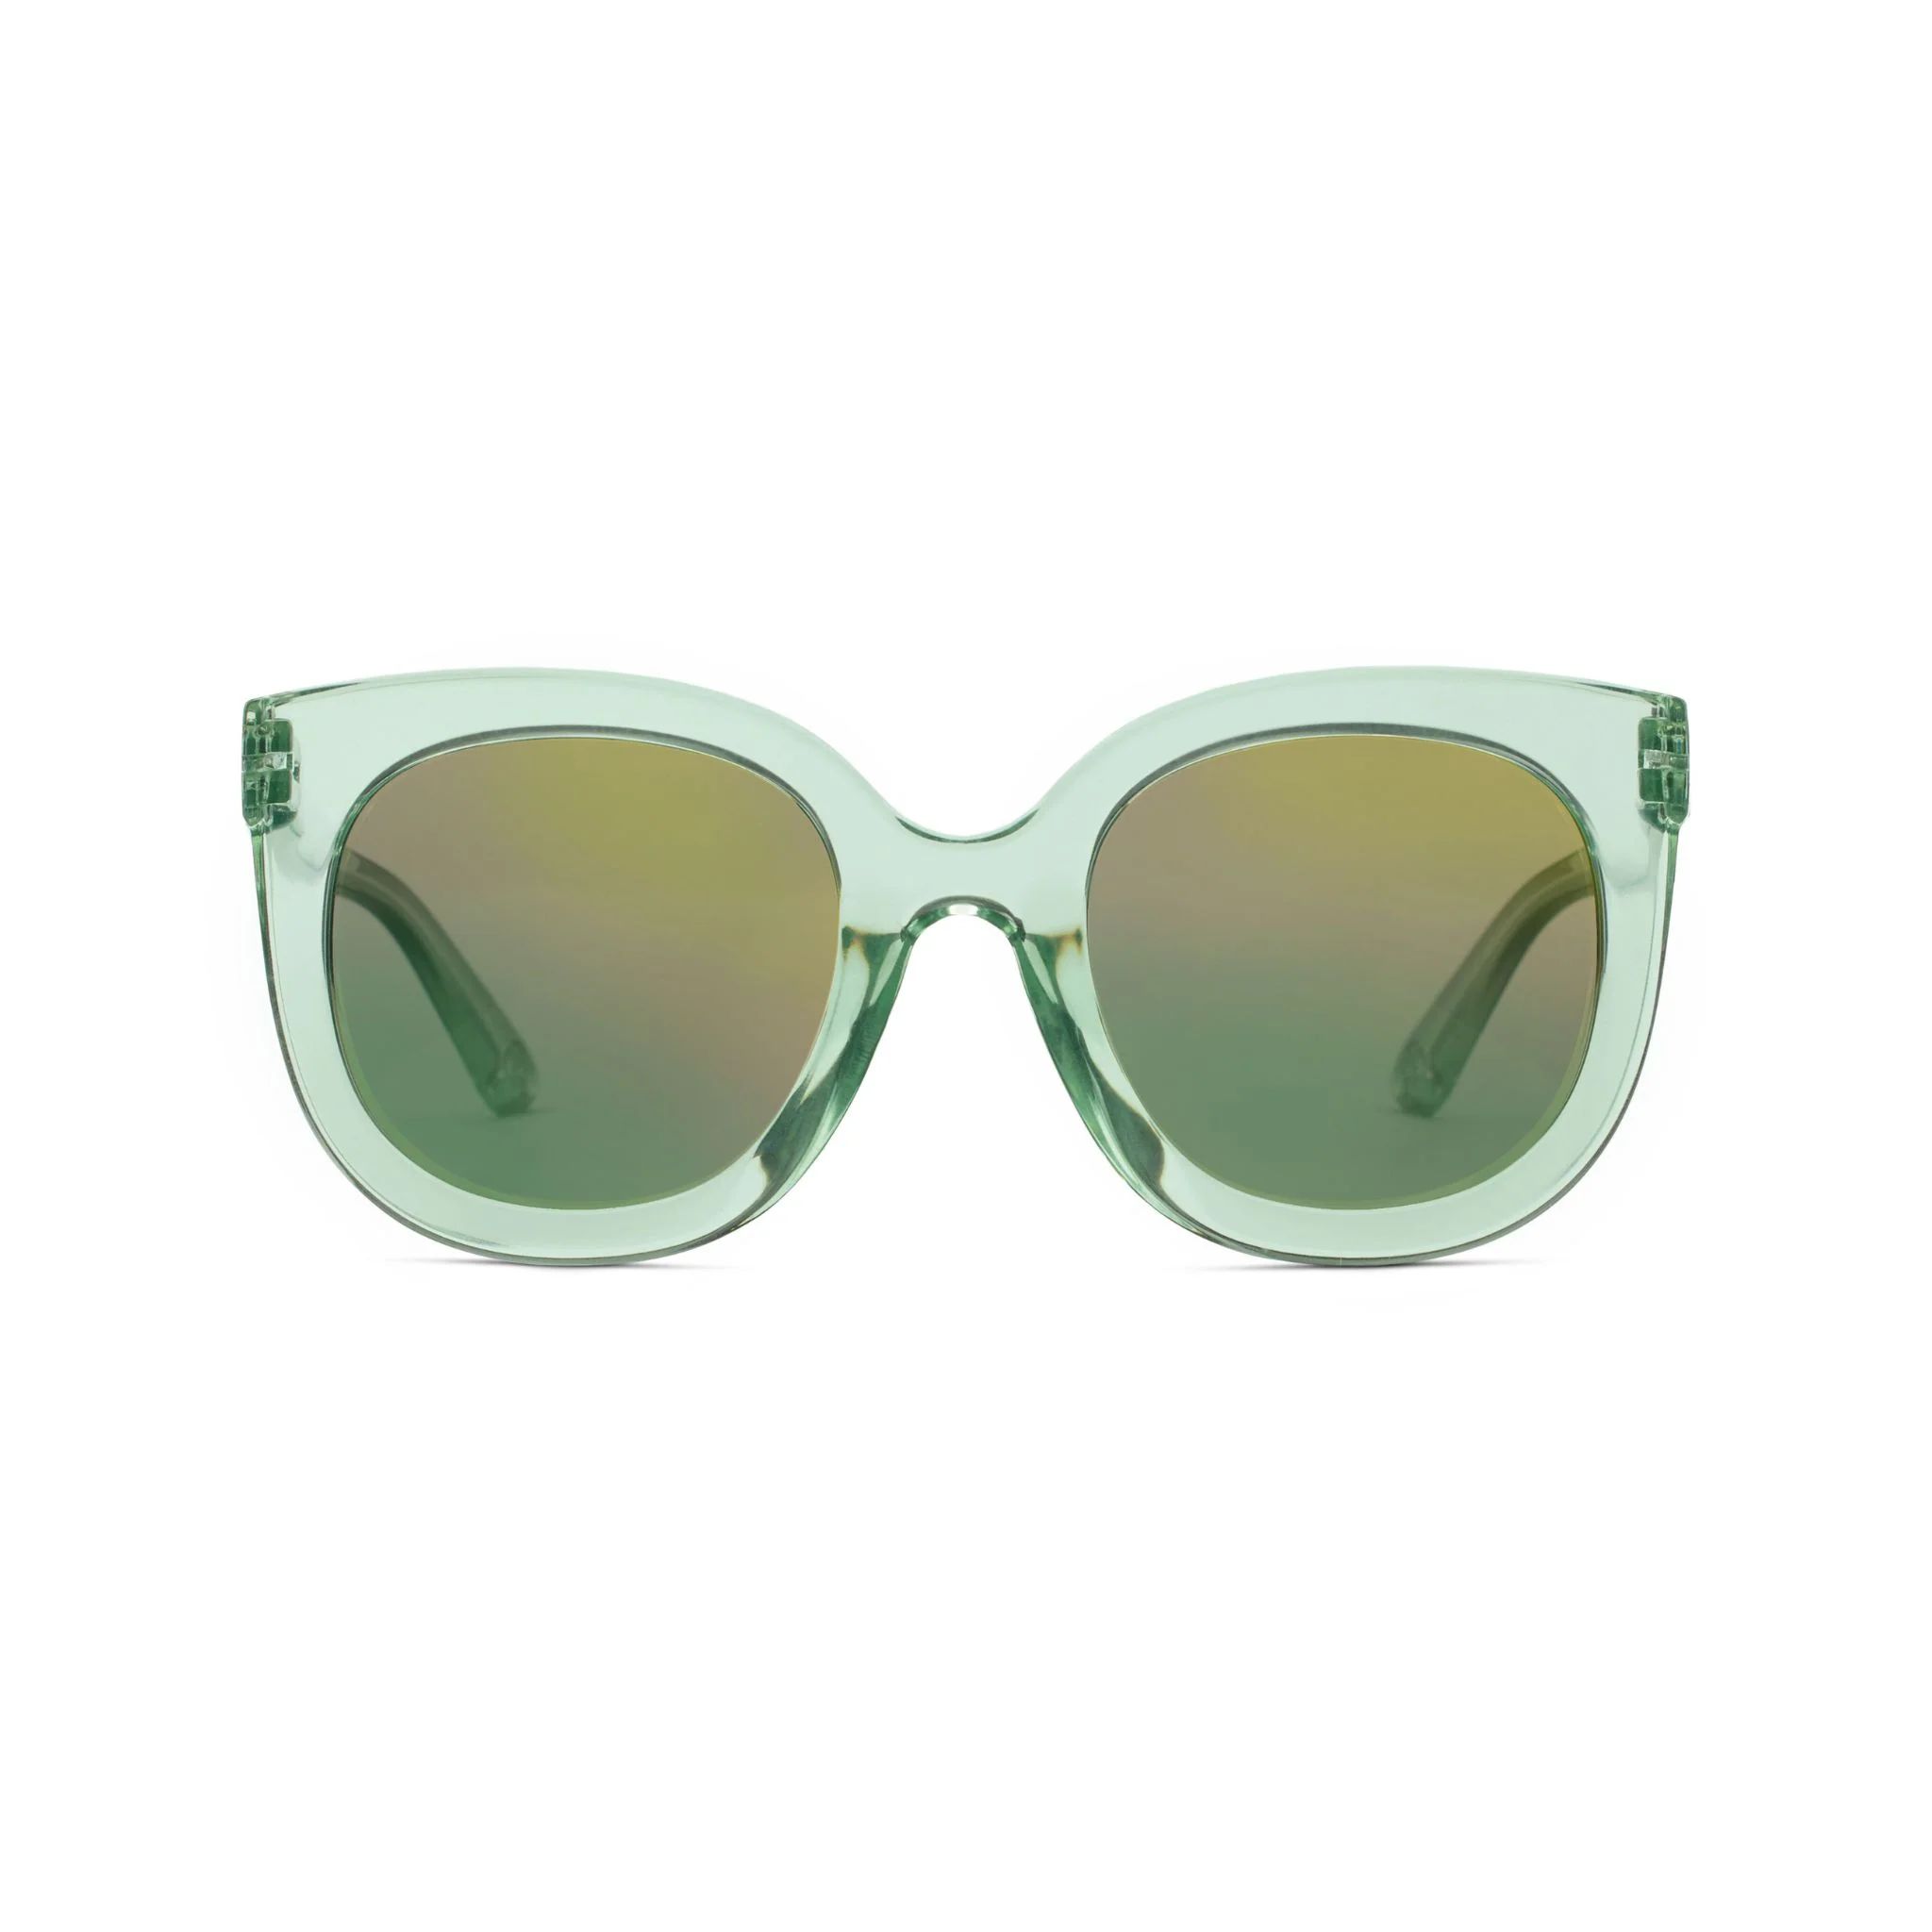 Logging Out (Sunglasses) - Peepers by PeeperSpecs | Peepers